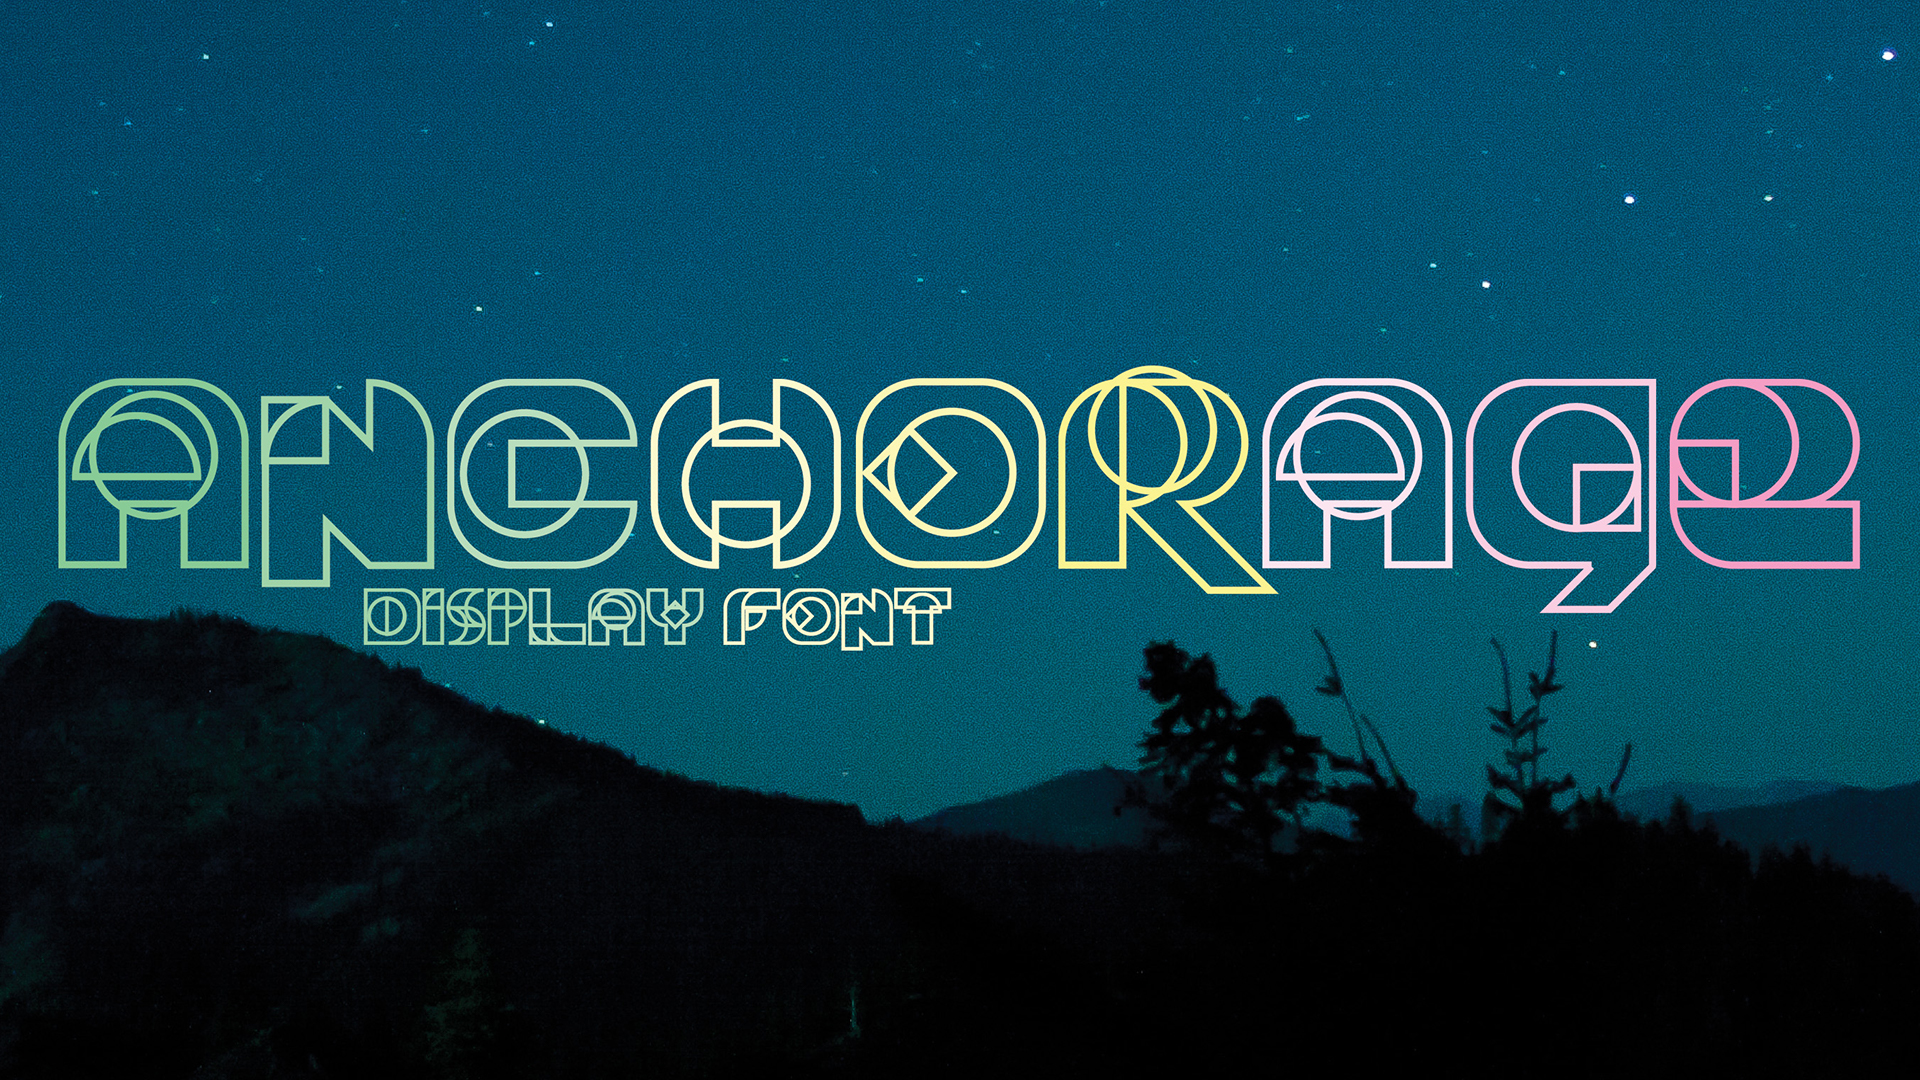 typeface title card, anchorage, set to a night sky